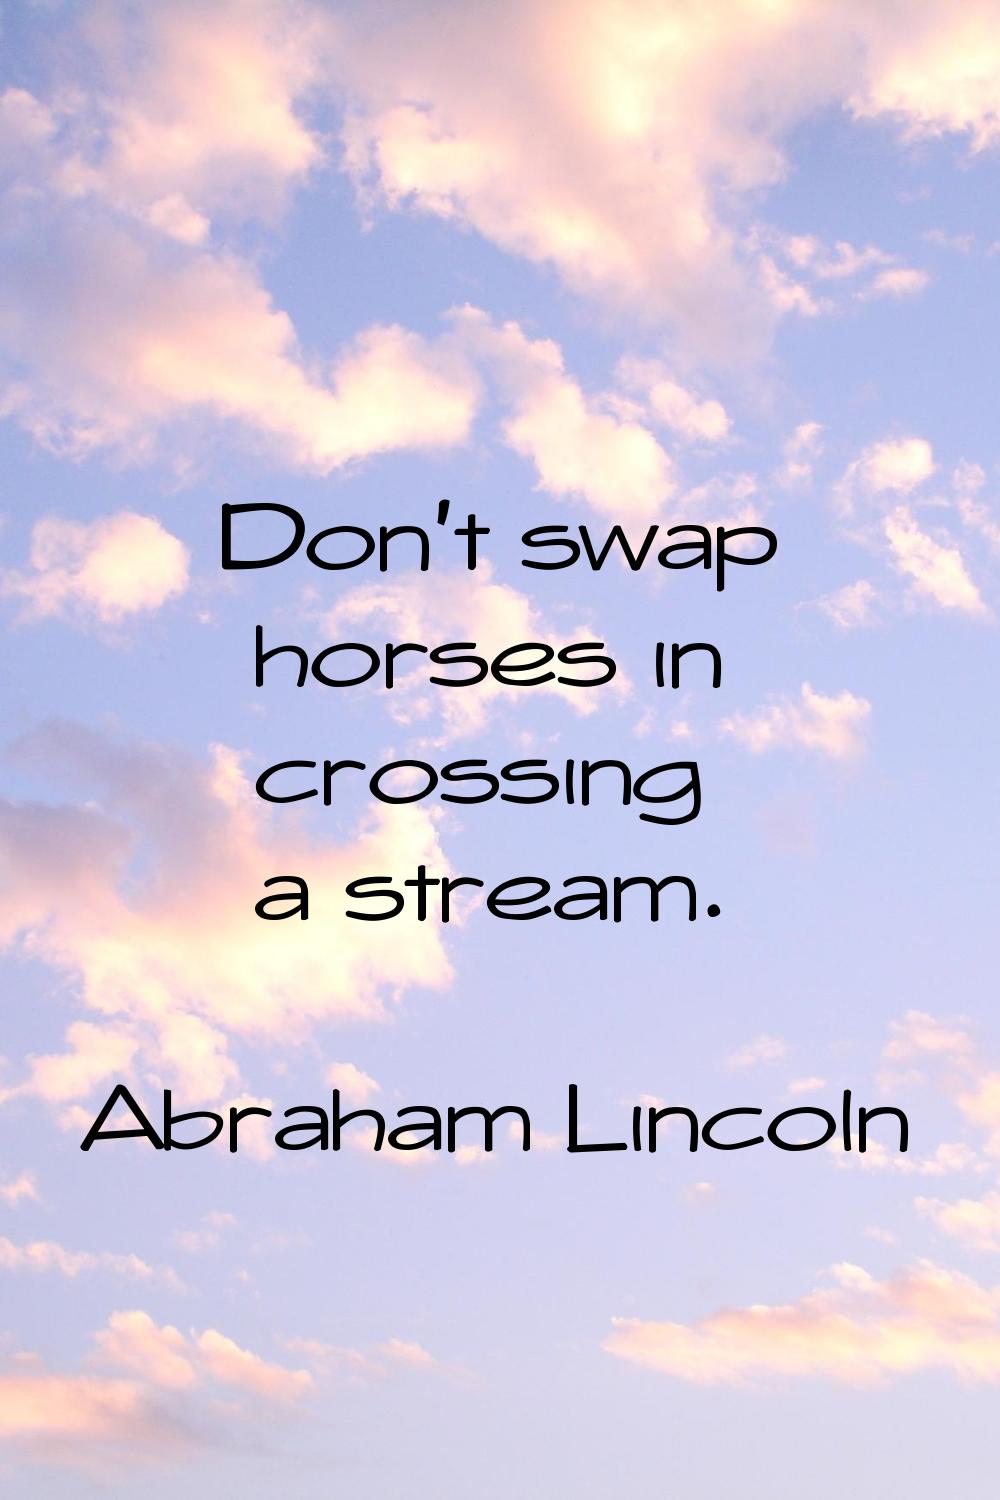 Don't swap horses in crossing a stream.